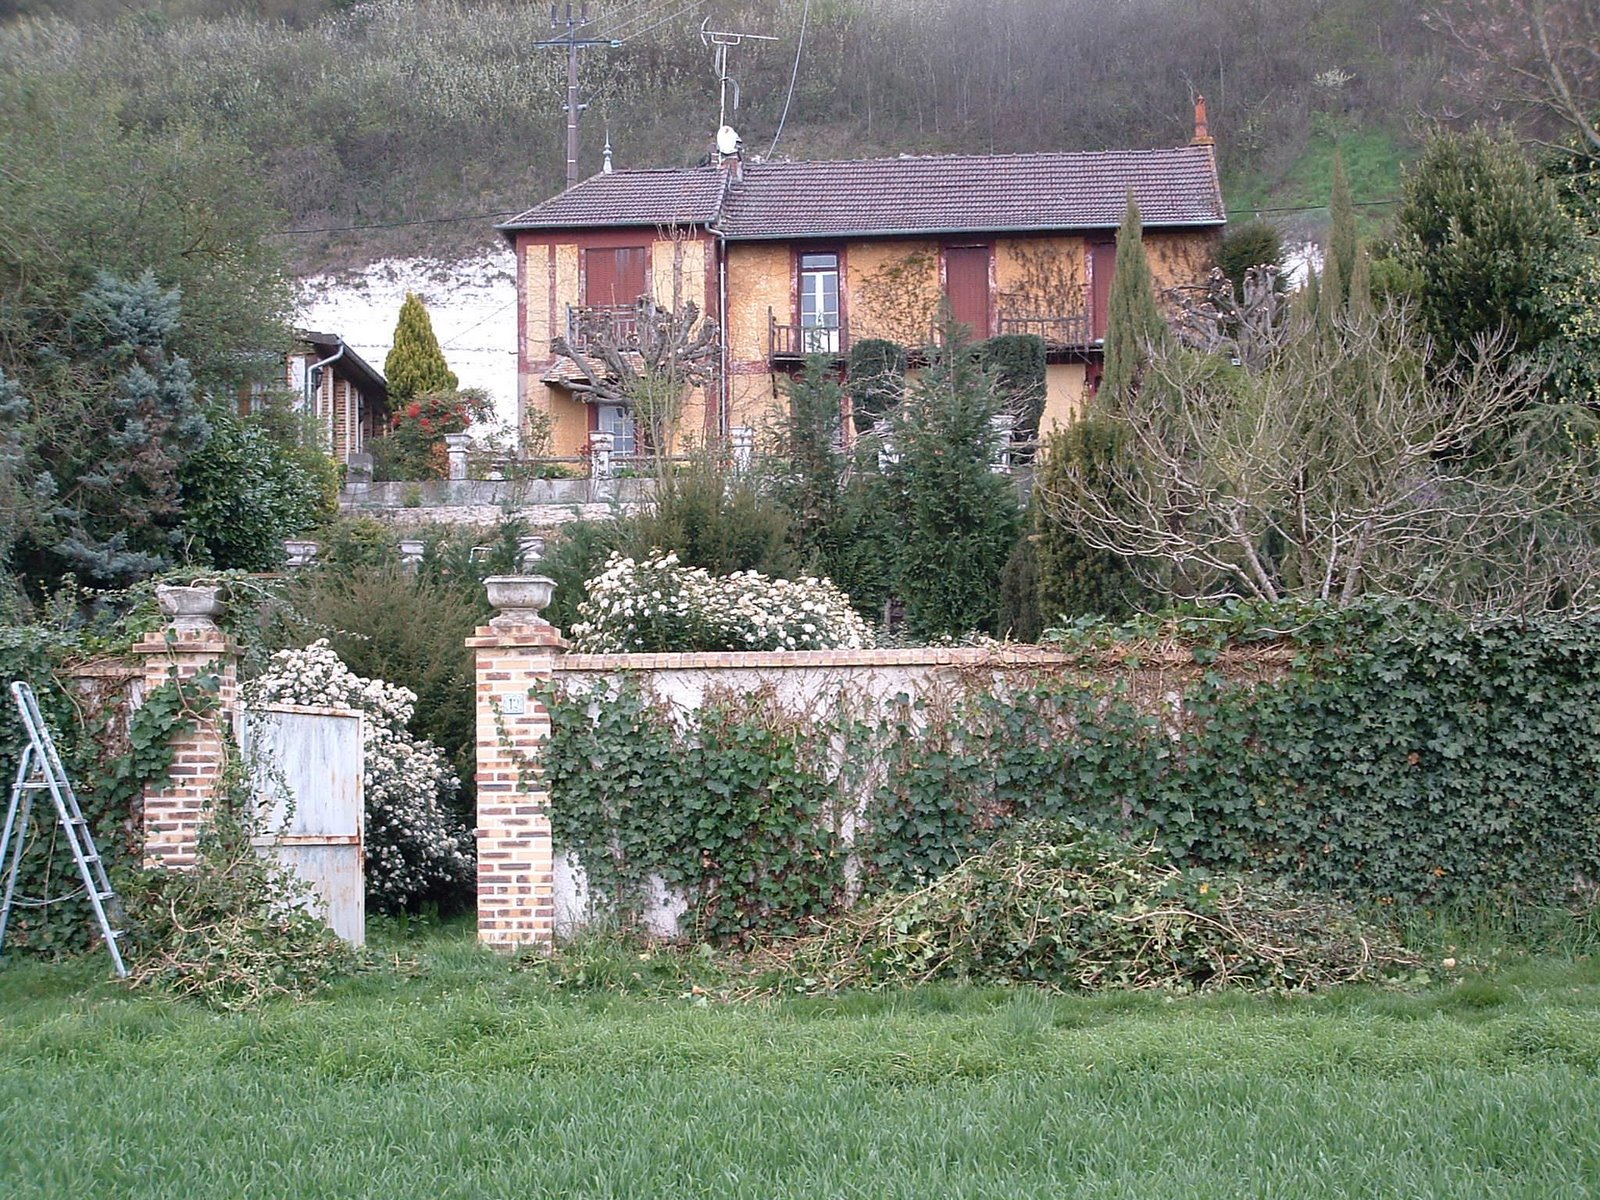 [April,+pruning+liere,+house+from+field.JPG]